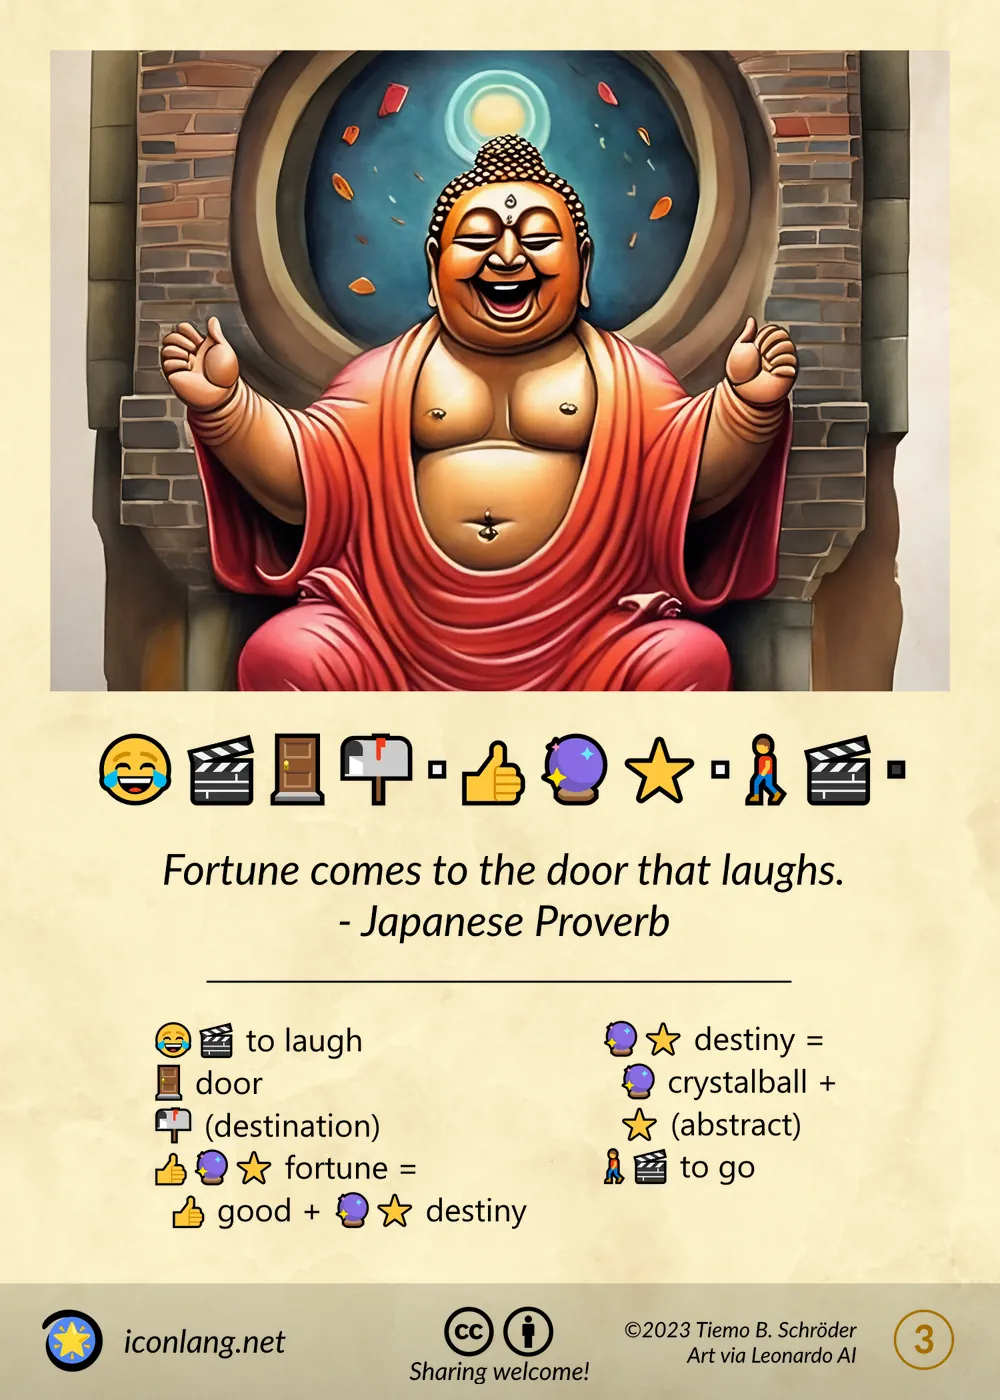 Card: Fortune comes to the door that laughs. - Japanese Proverb